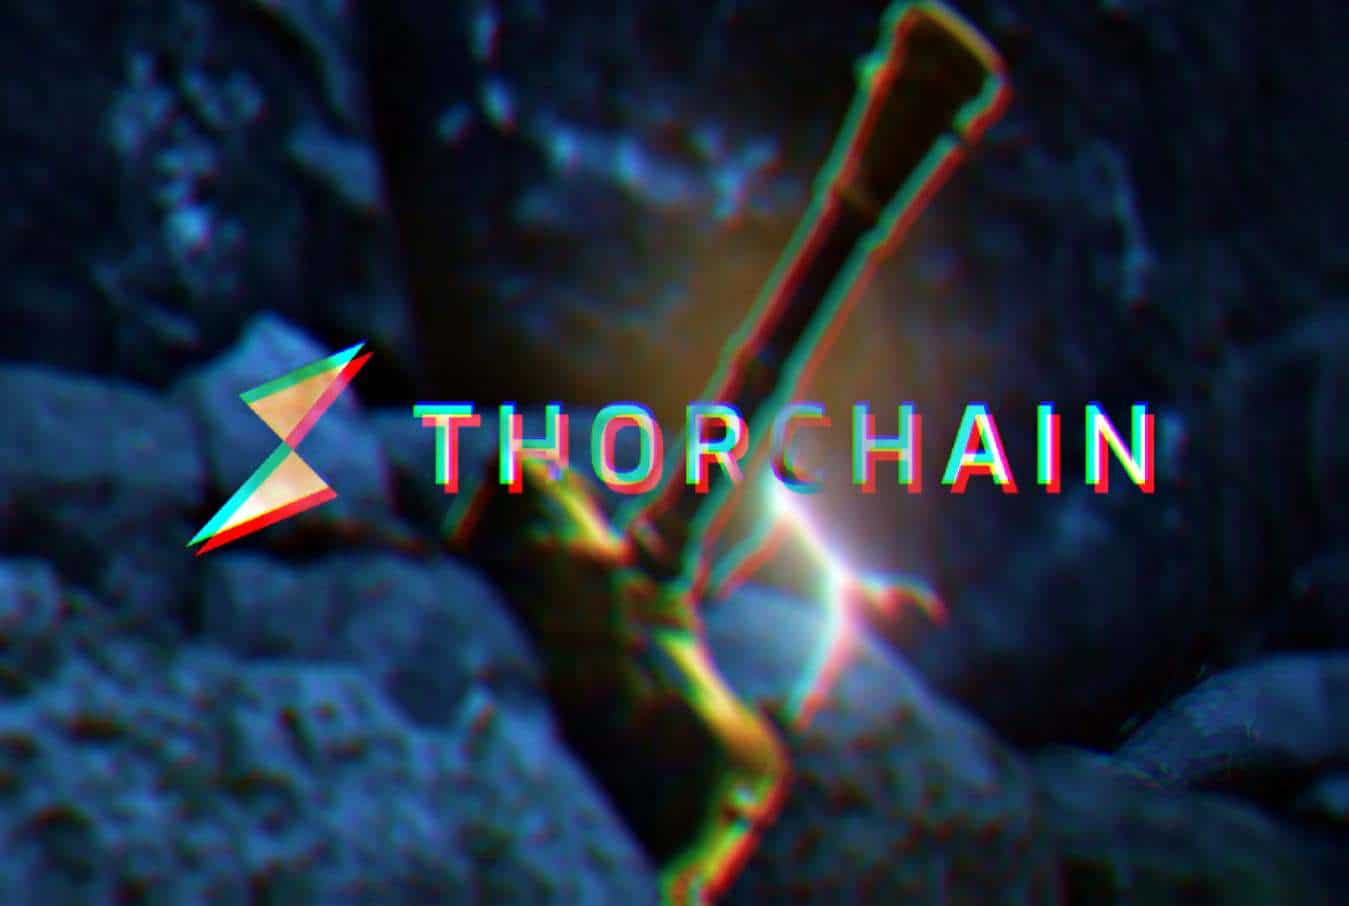 Defi protocol THORChain loses $8 million in "seemingly whitehat" attack